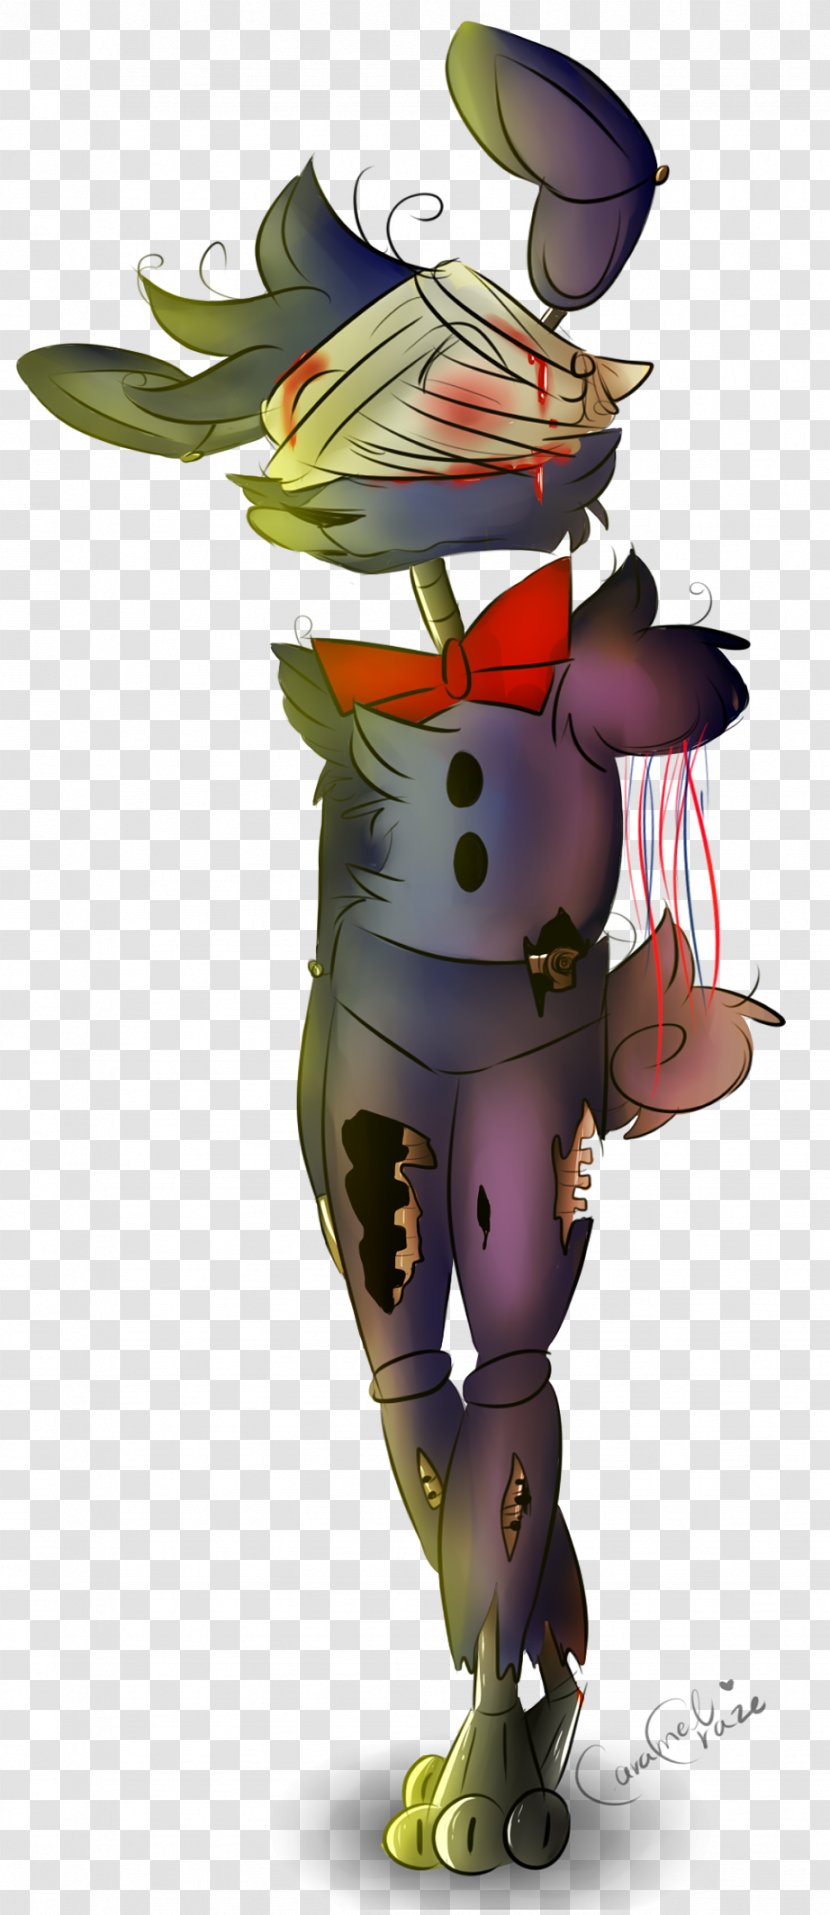 Five Nights At Freddy's 2 Fan Art Cartoon Drawing - Withered Leaf Transparent PNG